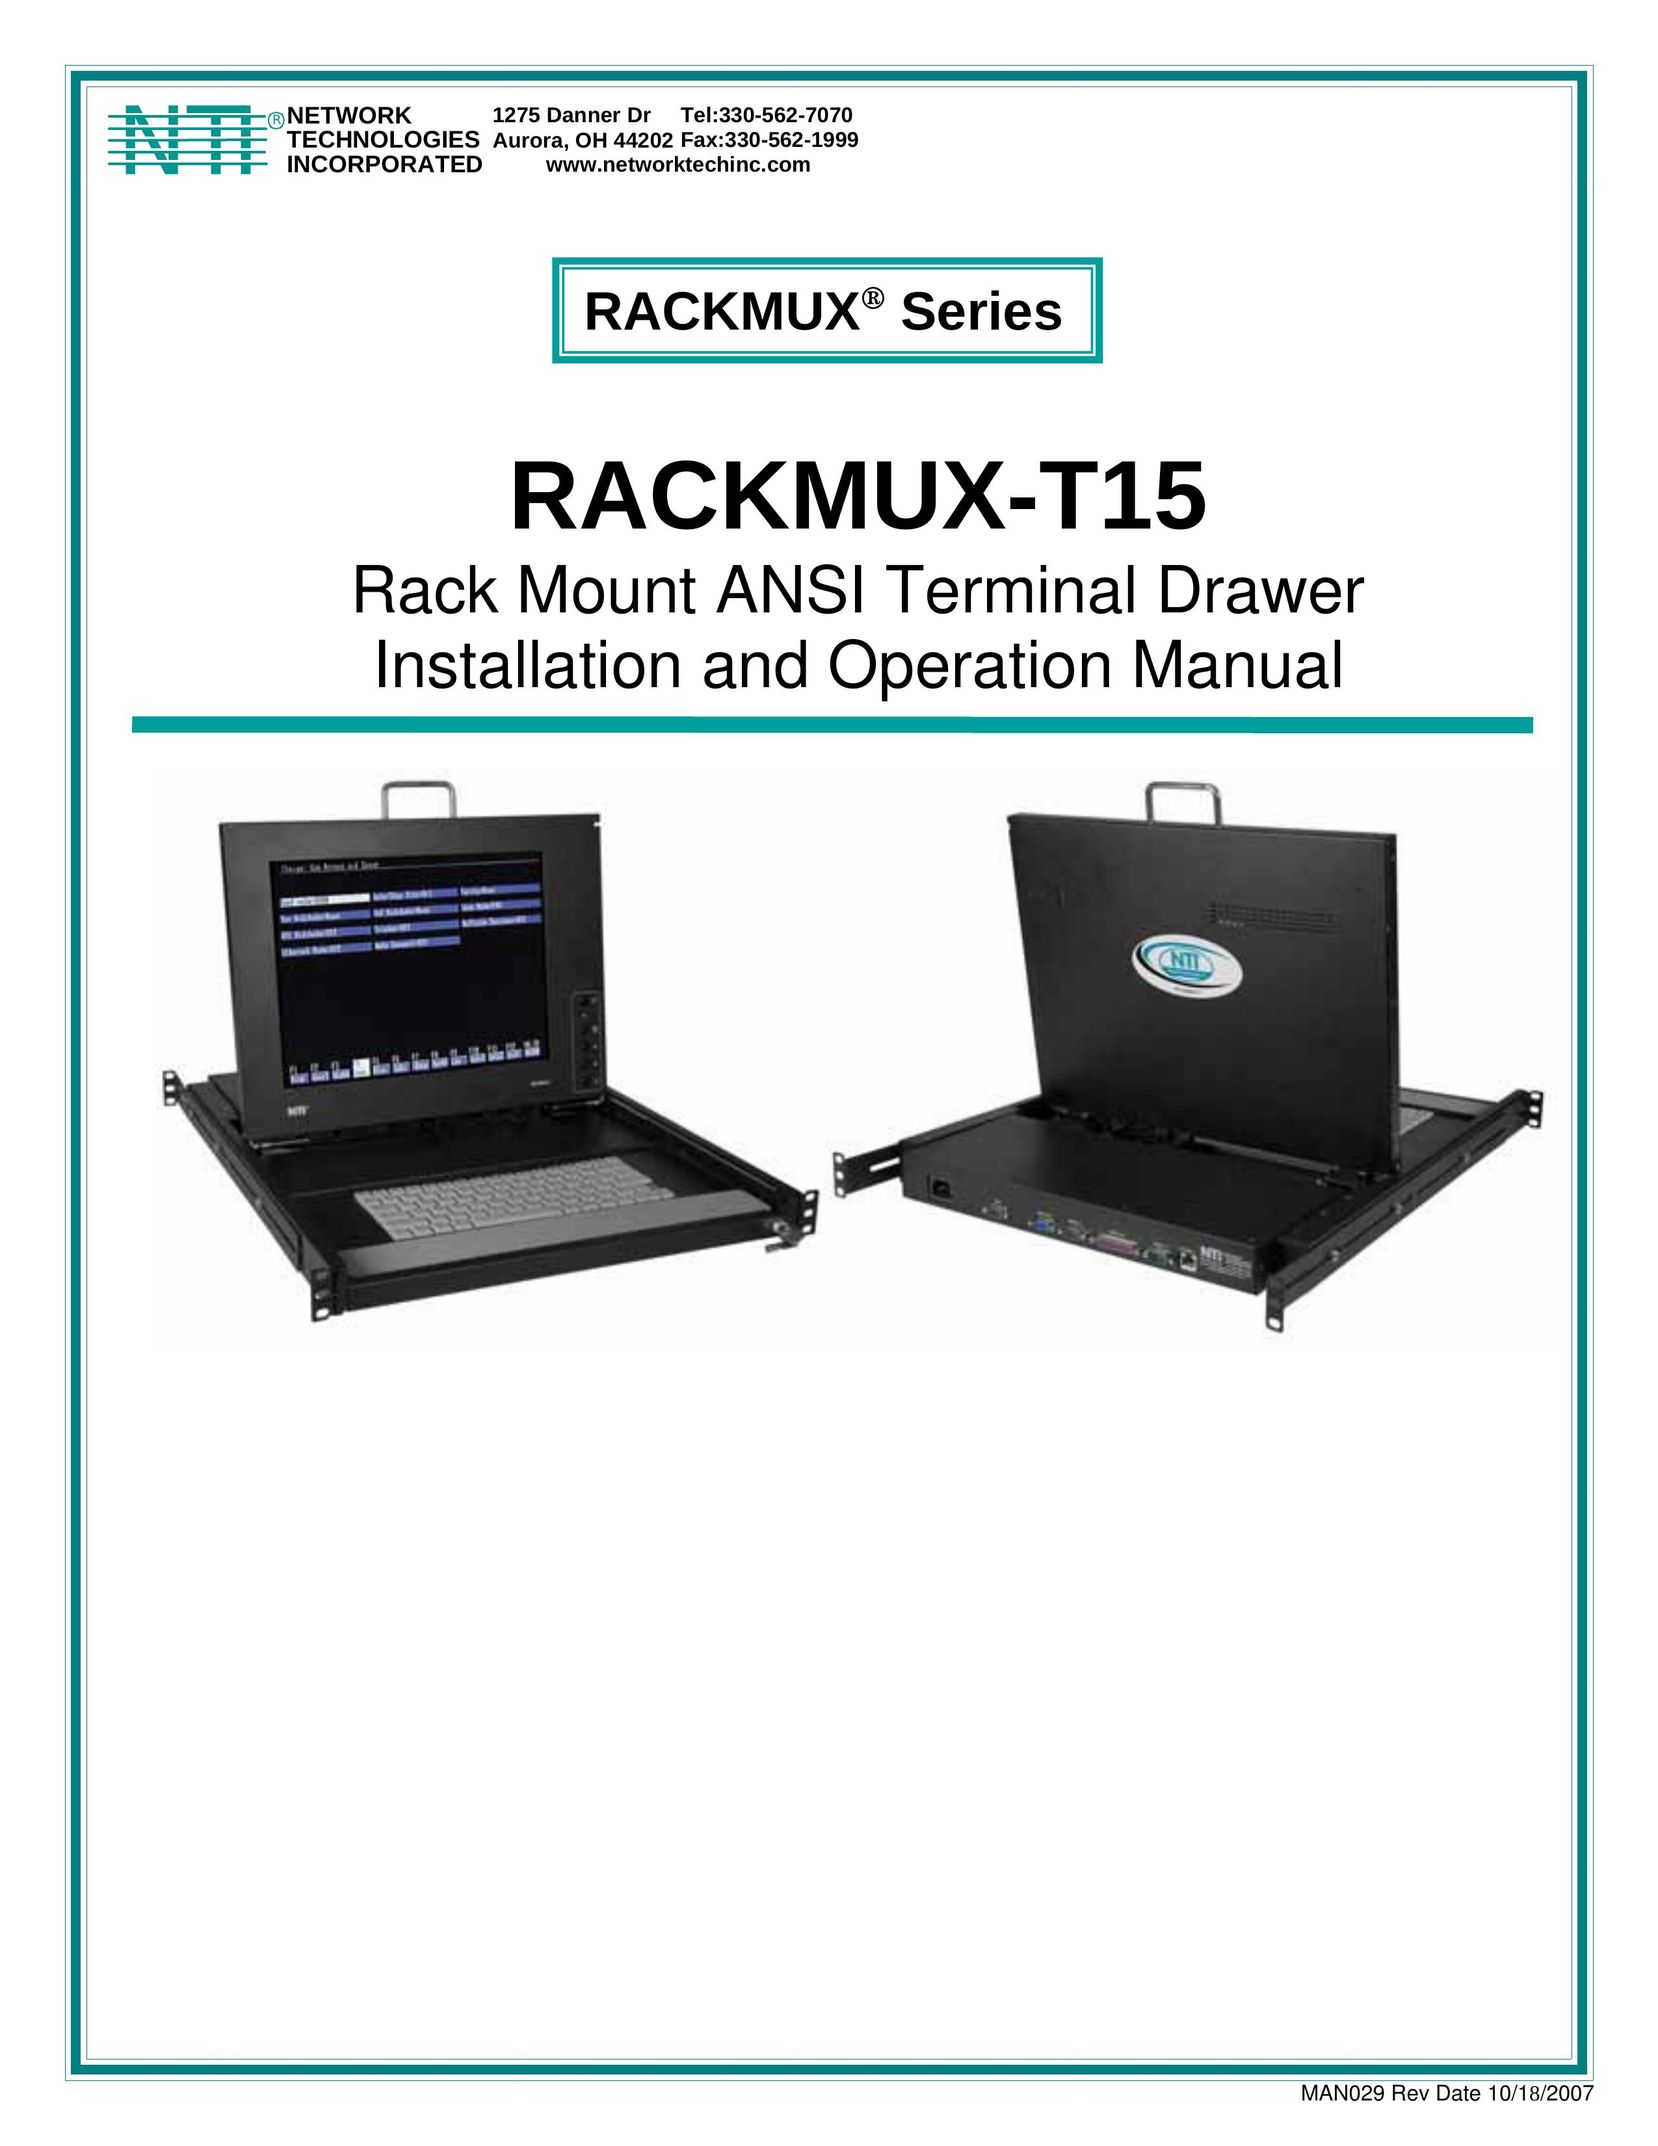 Network Technologies RACKMUX Series Carrying Case User Manual